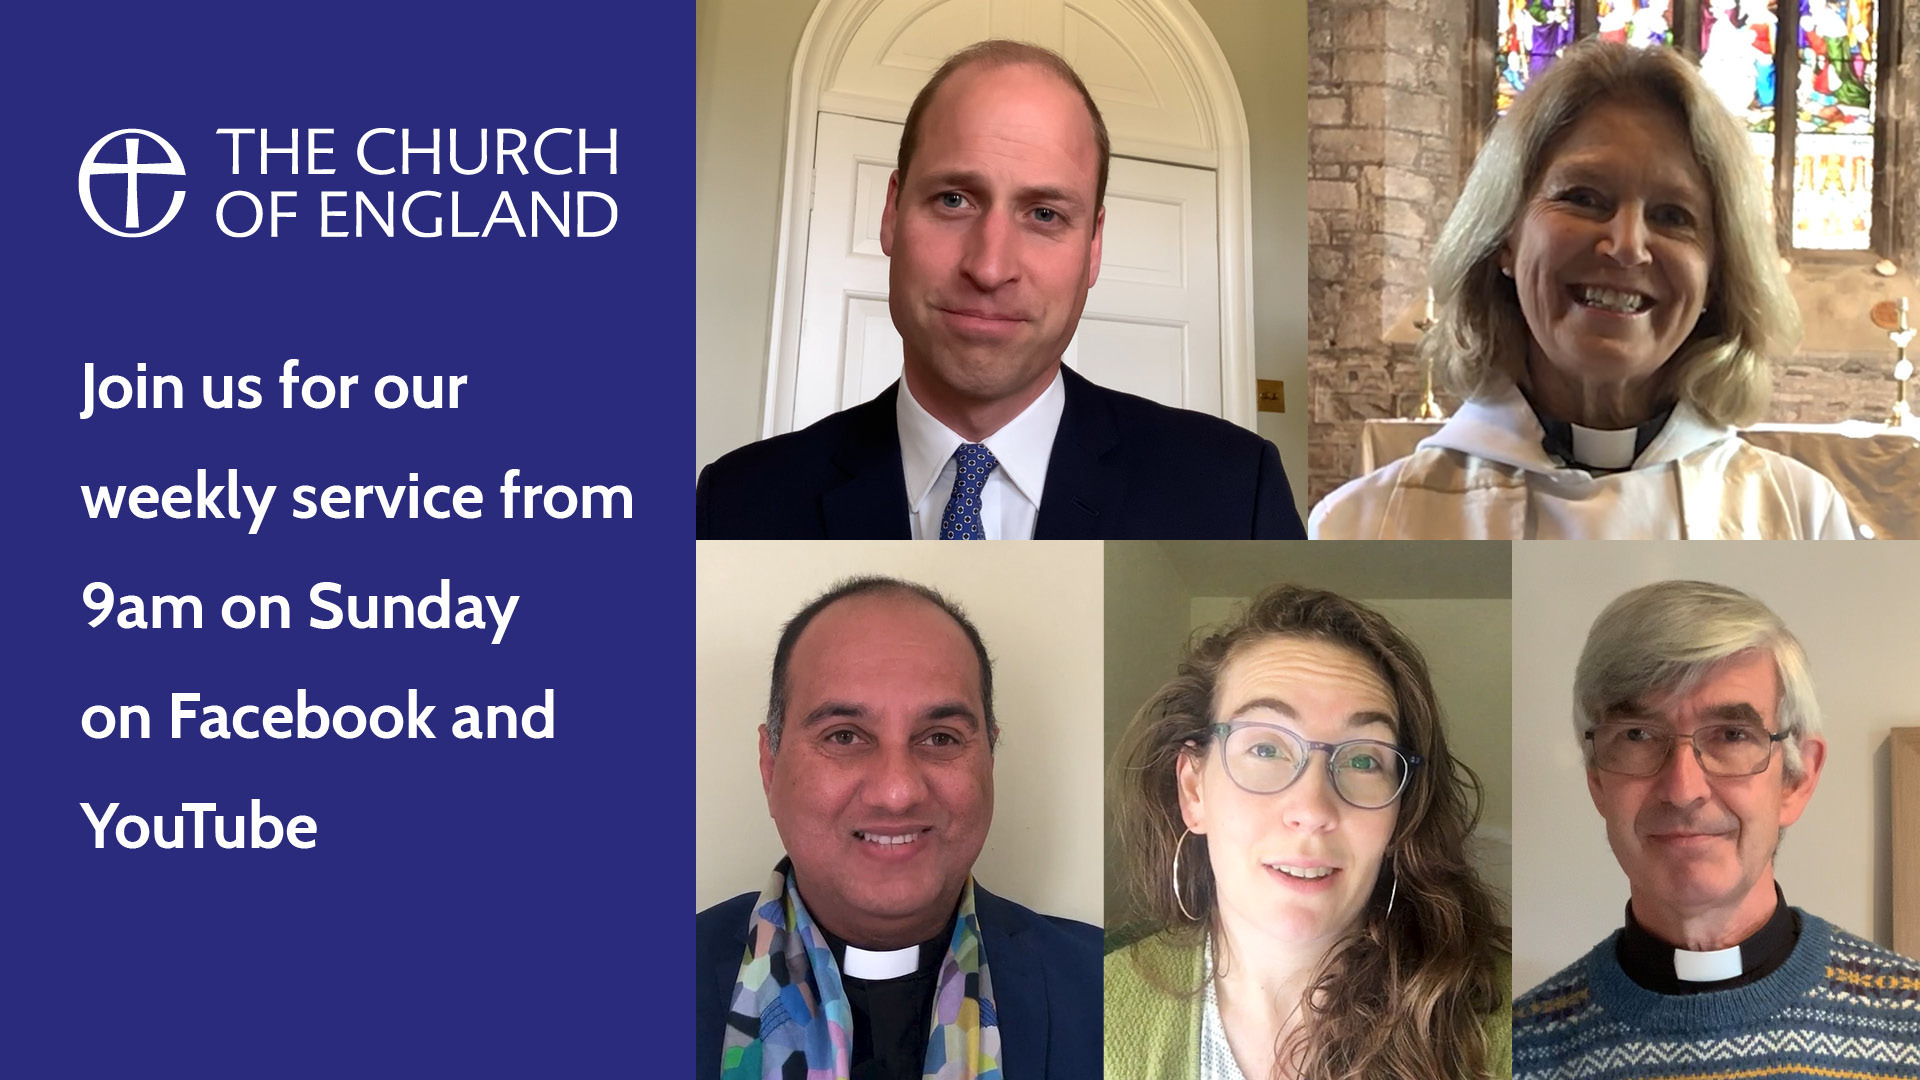 The Church of England's national online service for 24 May 2020.